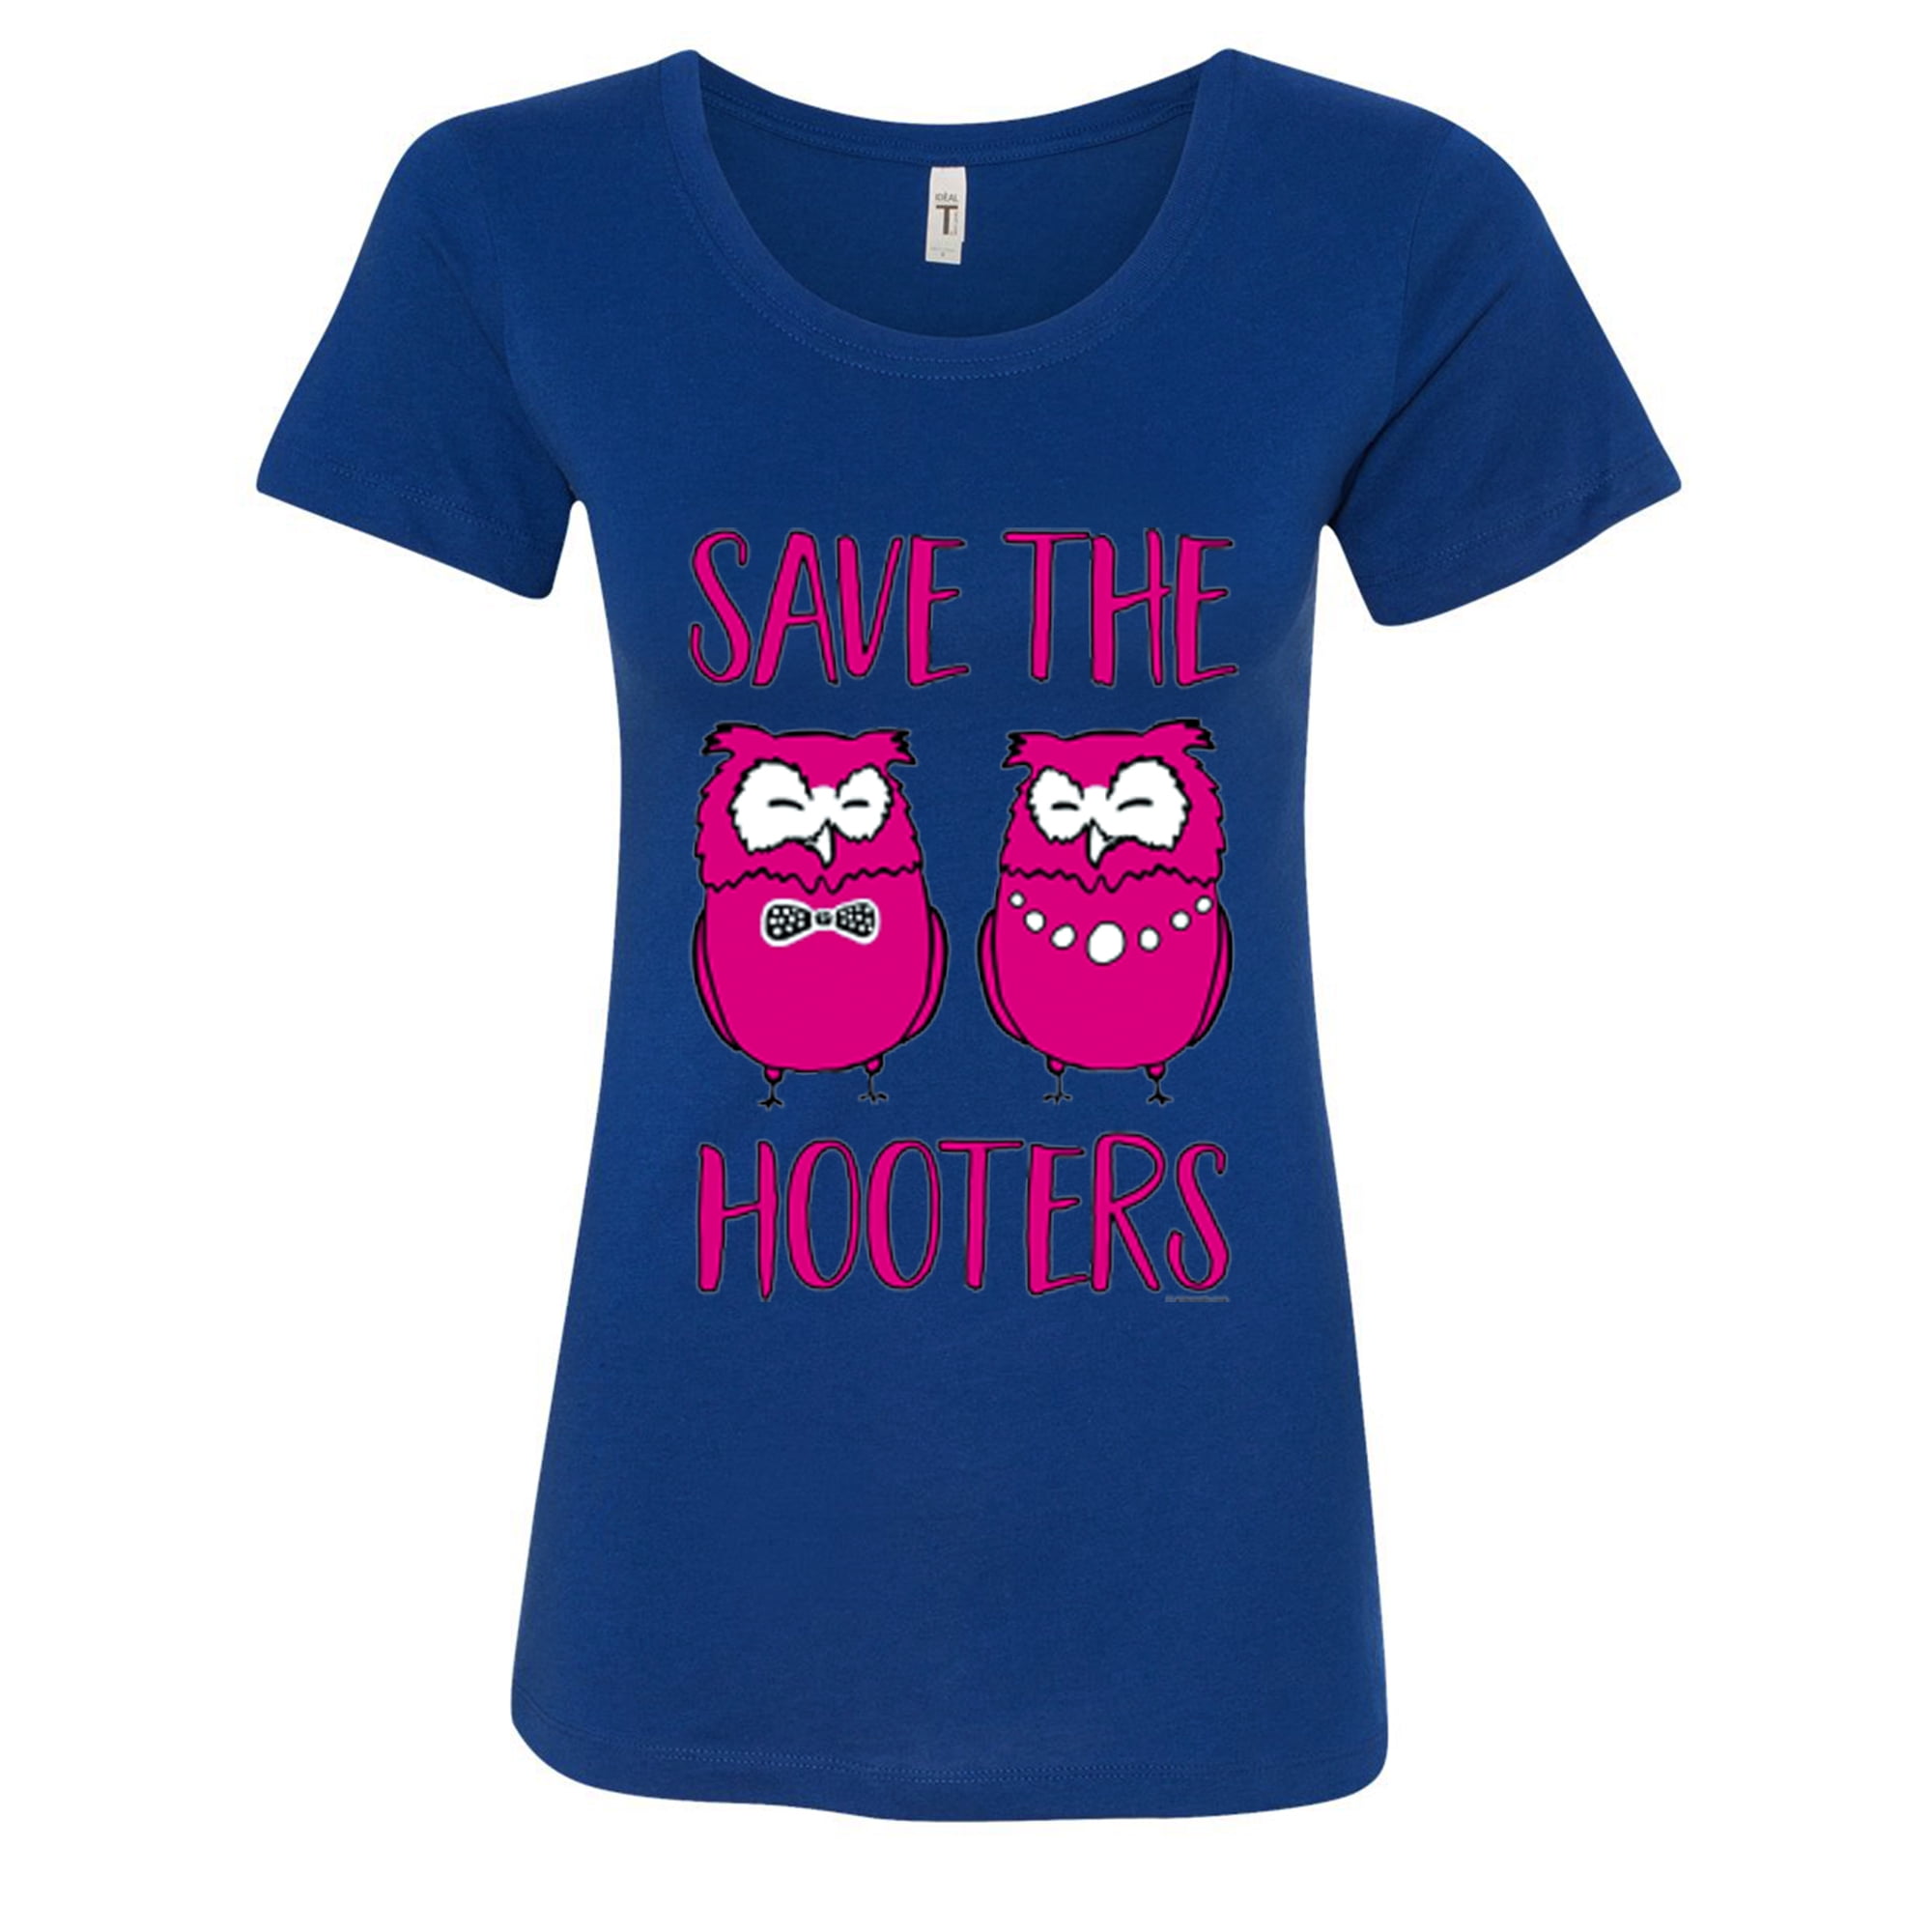 Chicks In The Office Merch Store